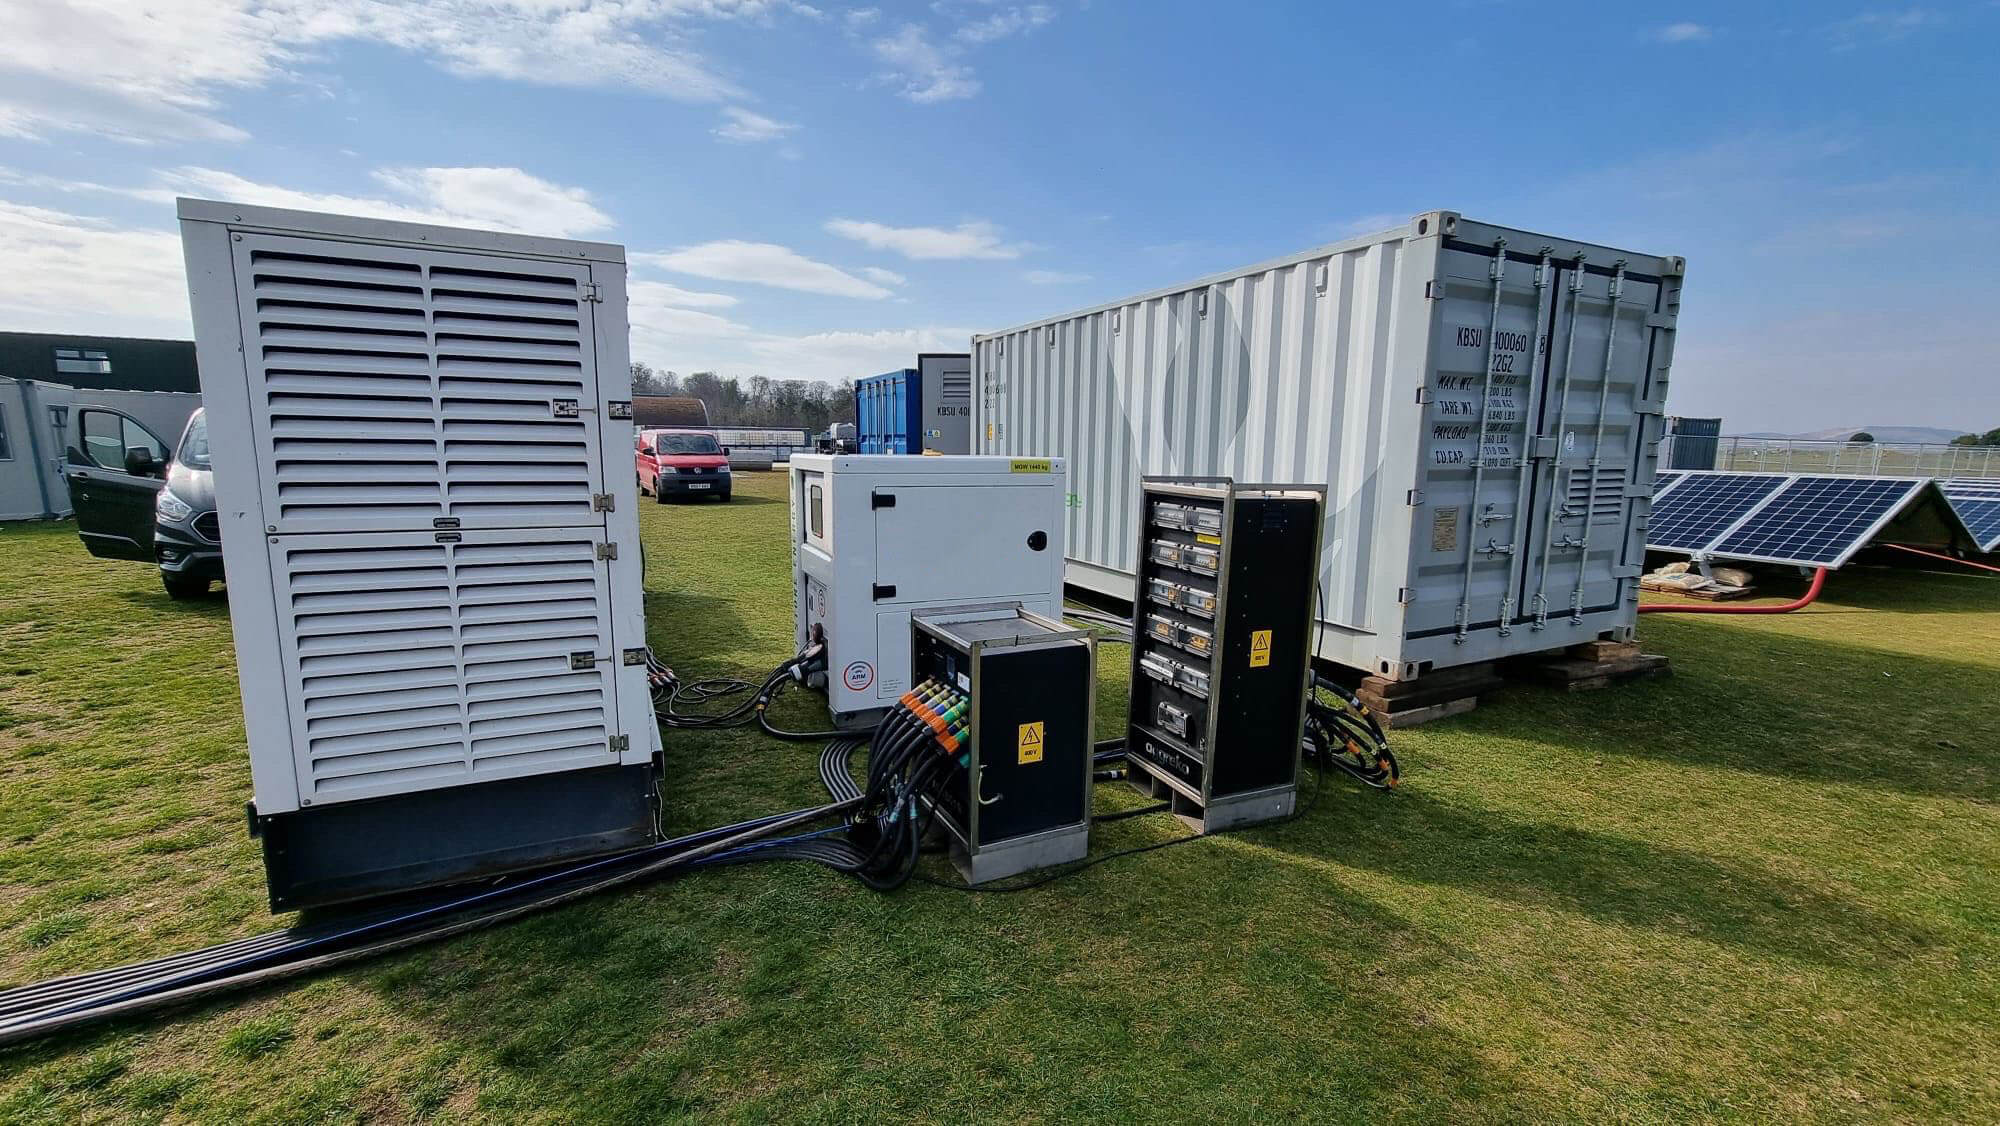 Silent POWRBANK Energy Storage System In An Event